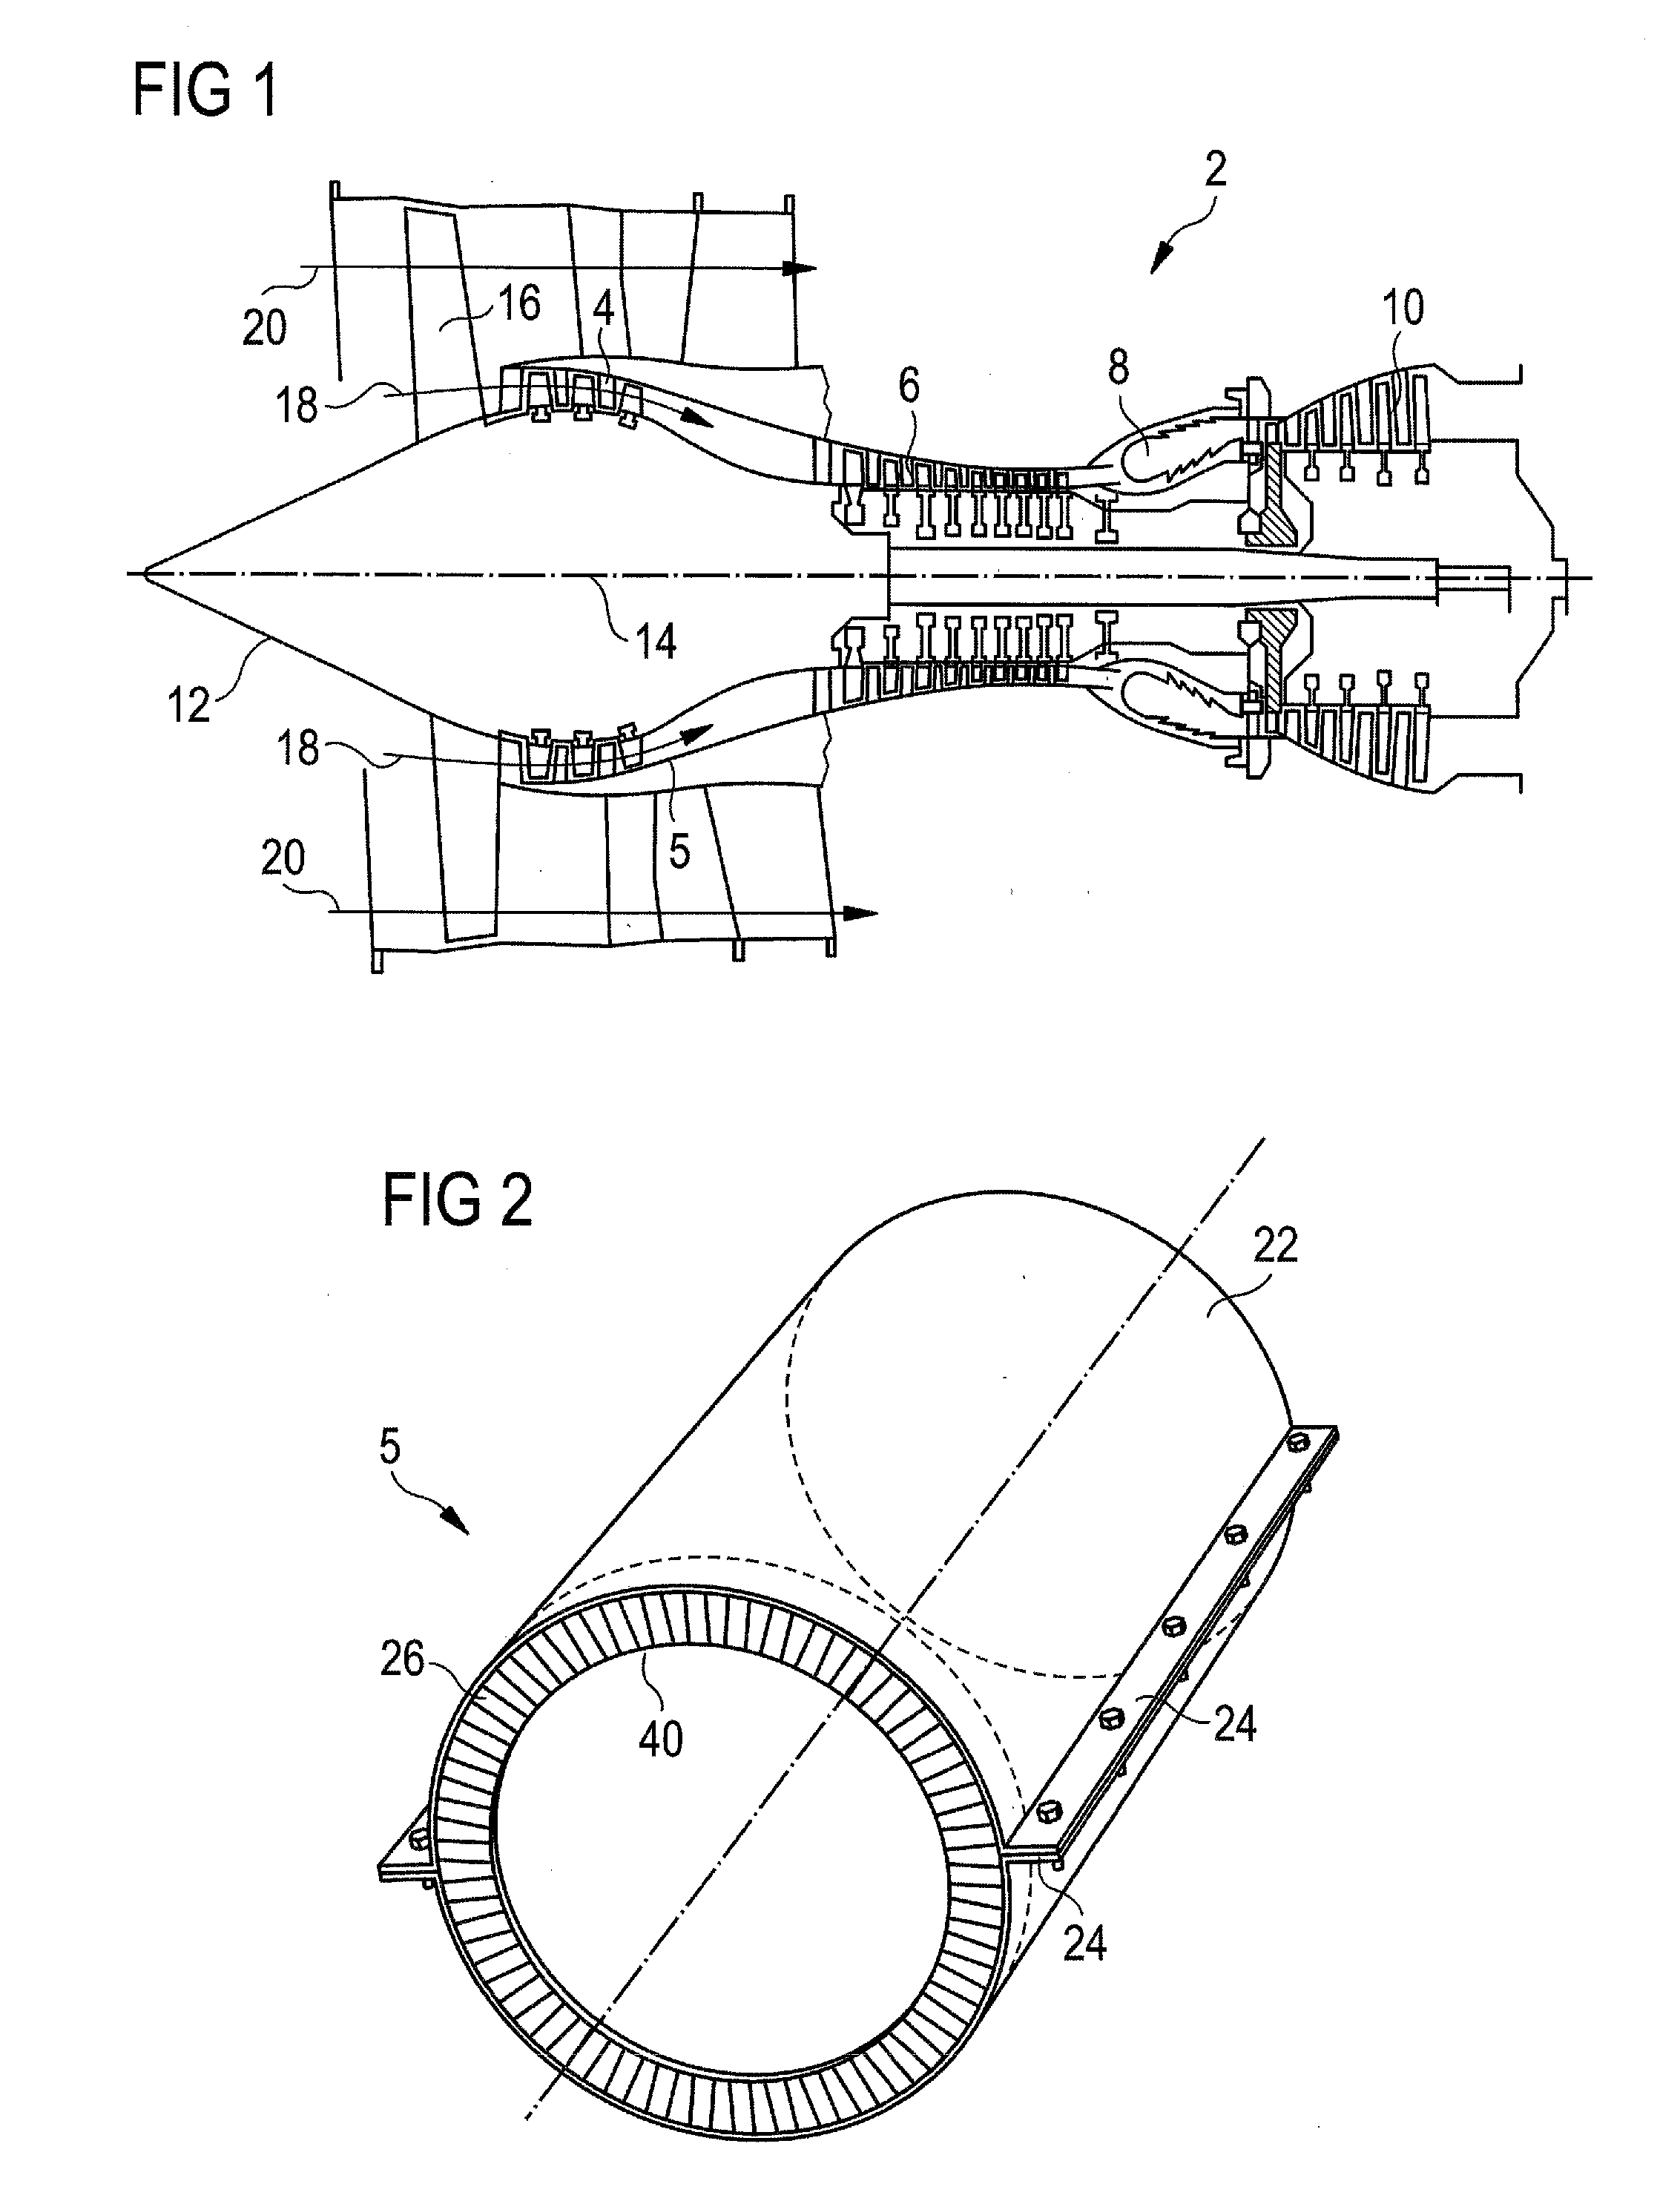 Stator Blade Sector for an Axial Turbomachine with a Dual Means of Fixing